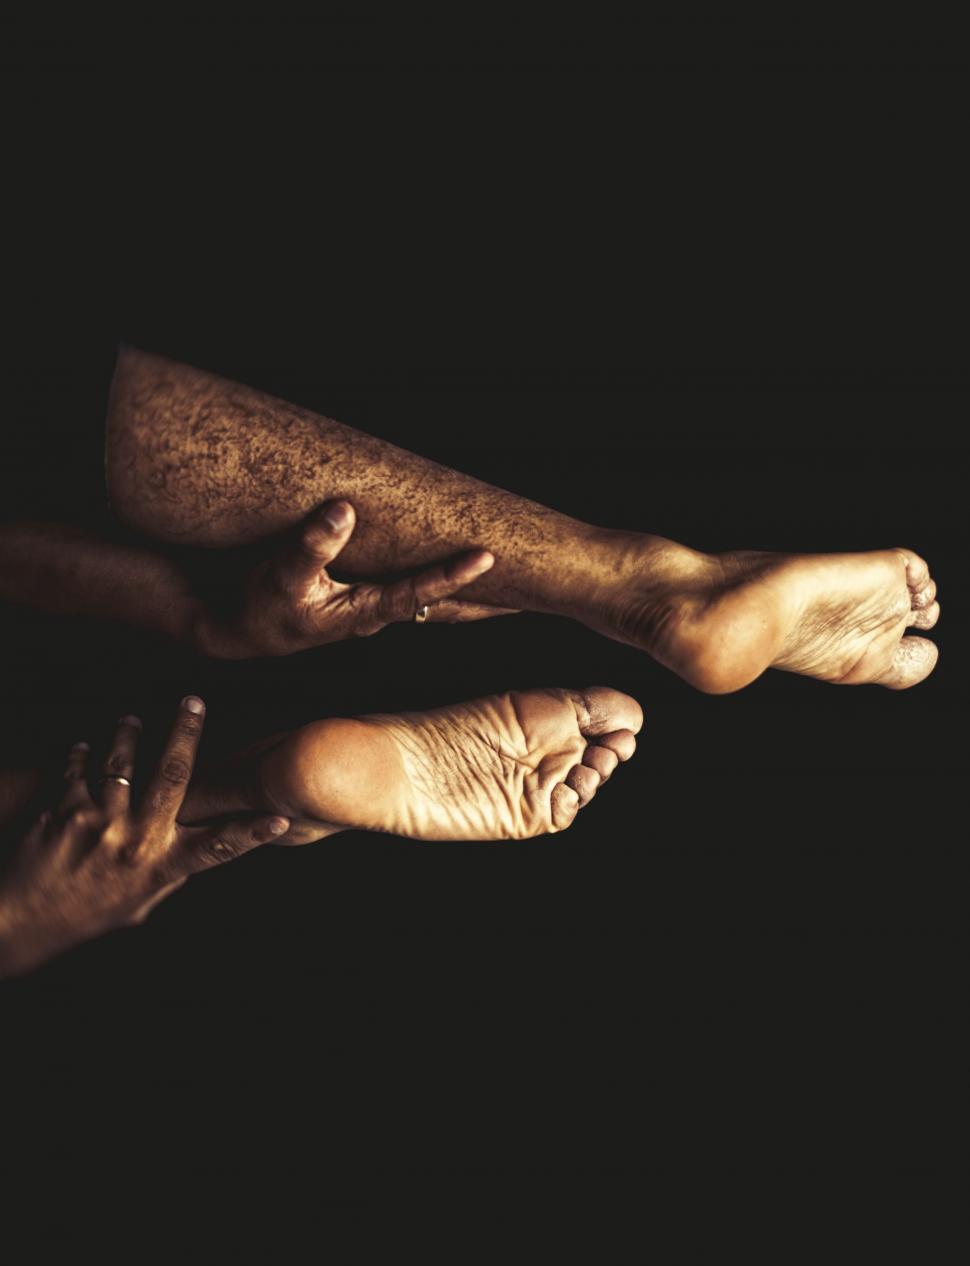 Free Image of Hands Holding Human Foot in Medical Examination 